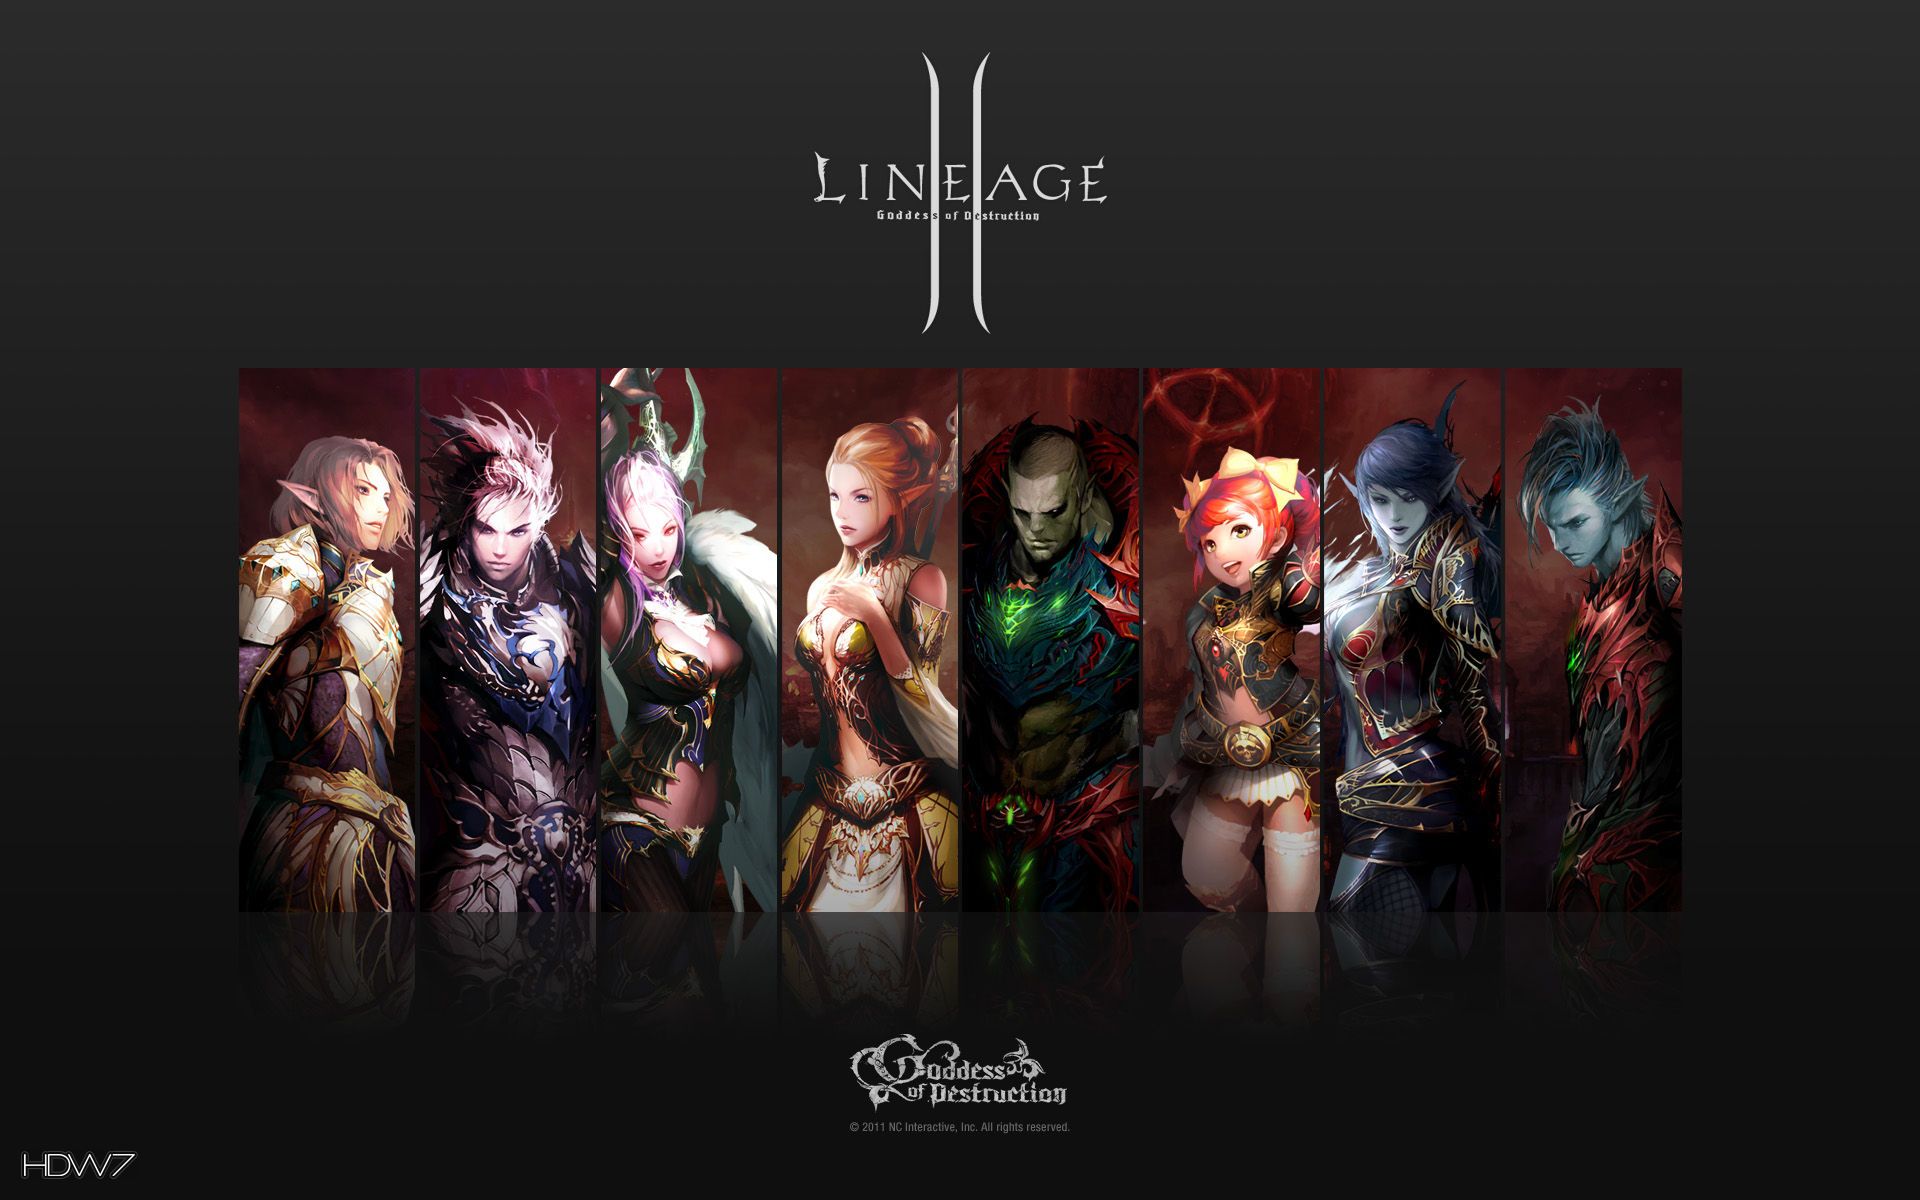 lineage 2 goddess of destruction lineage 2 classes widescreen